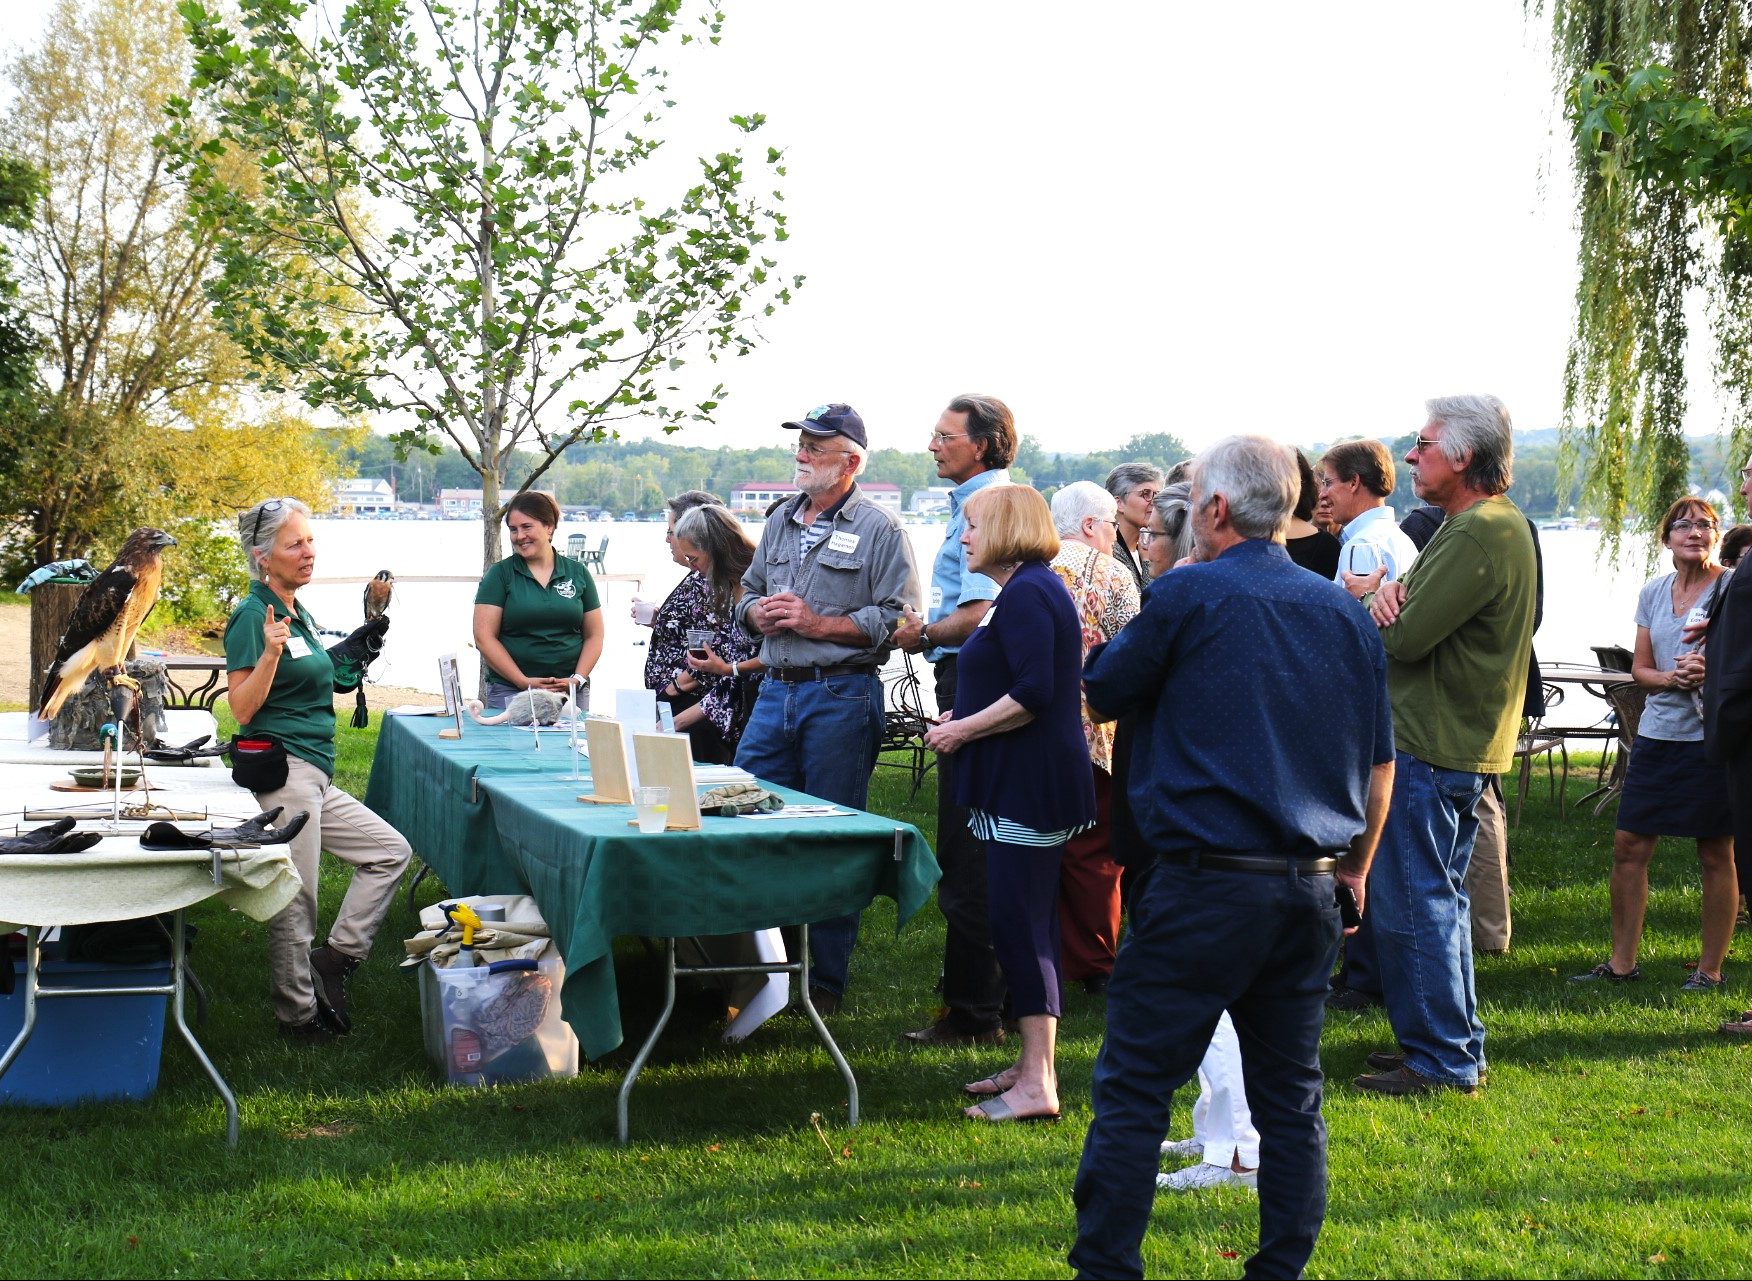 A gorgeous evening to celebrate the FSF community and bird-friendly forests!